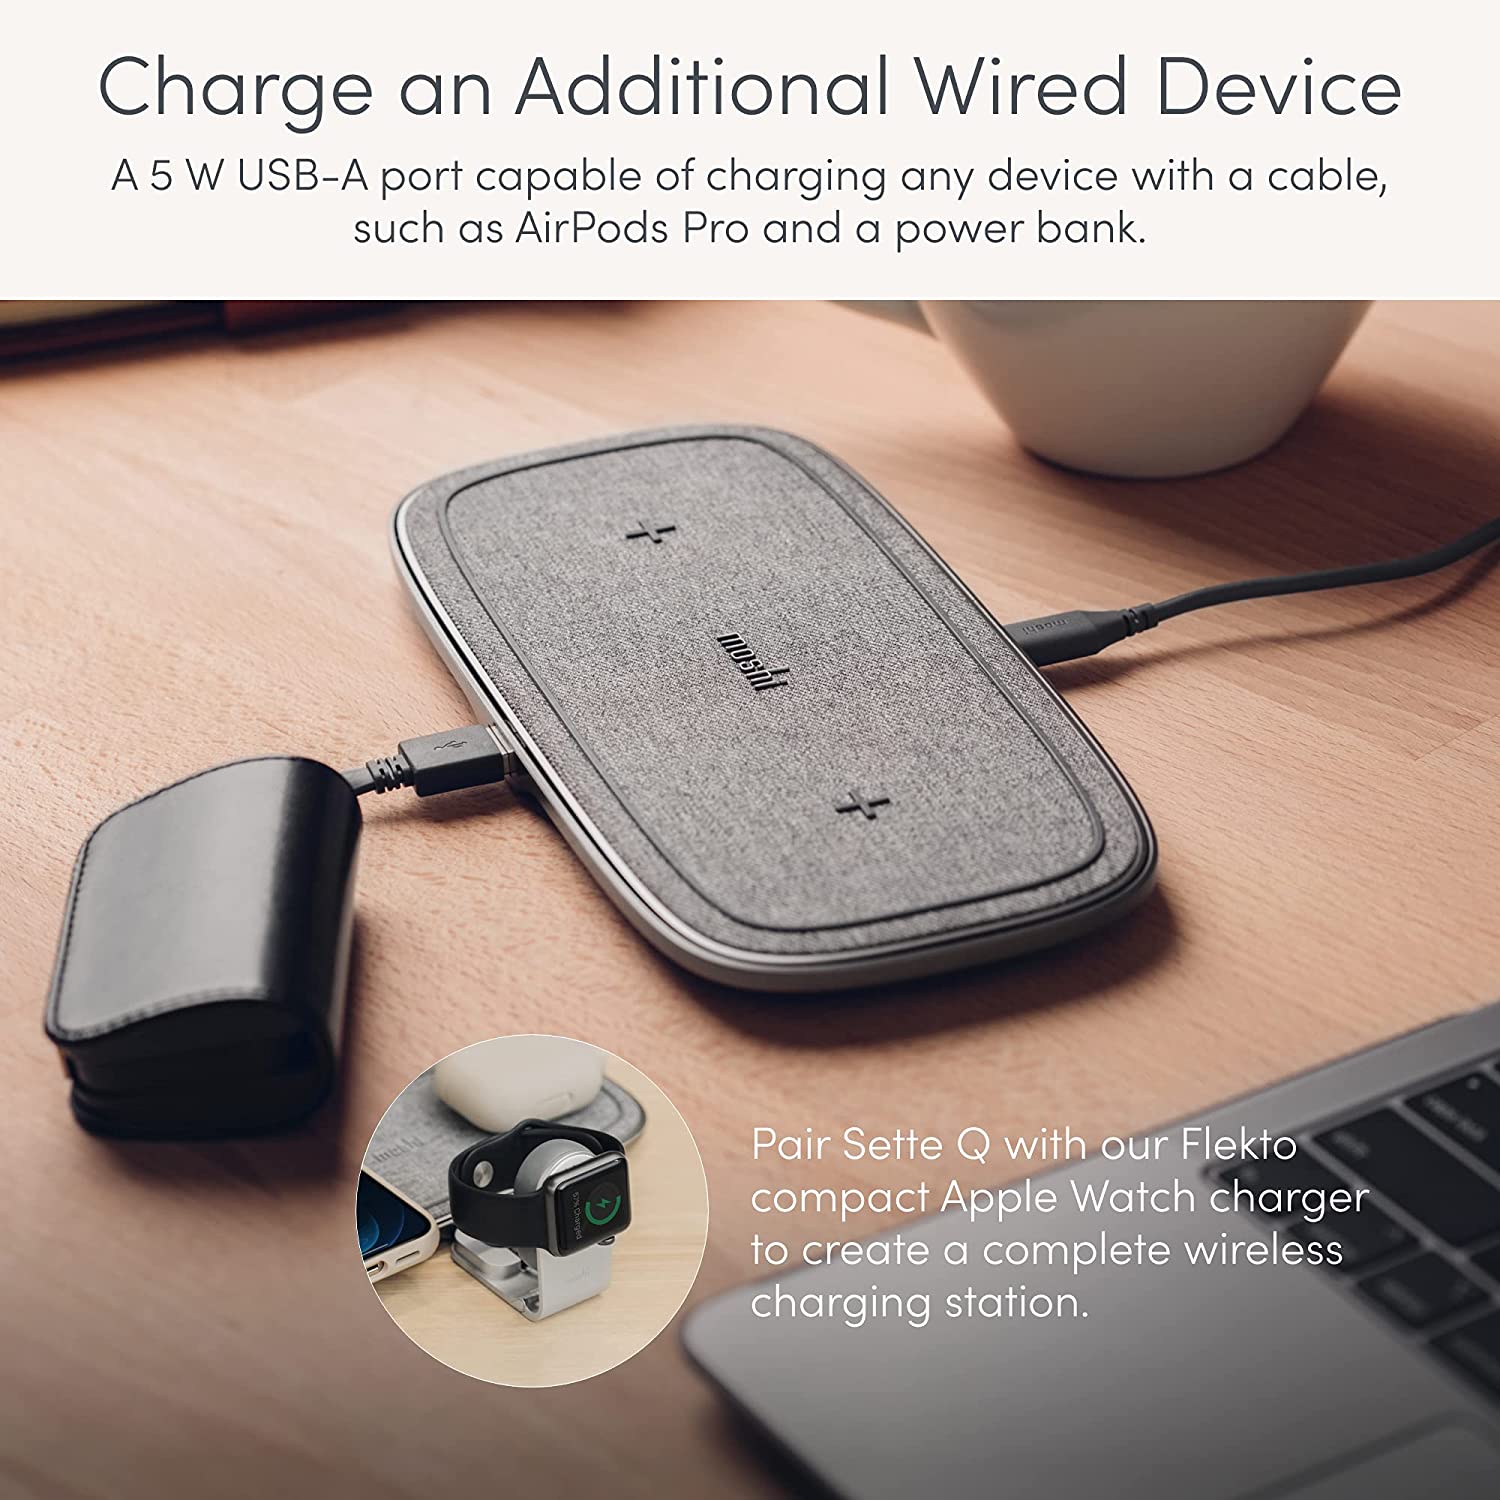 Moshi Sette Q dual wireless charging pad (adaptor not included)